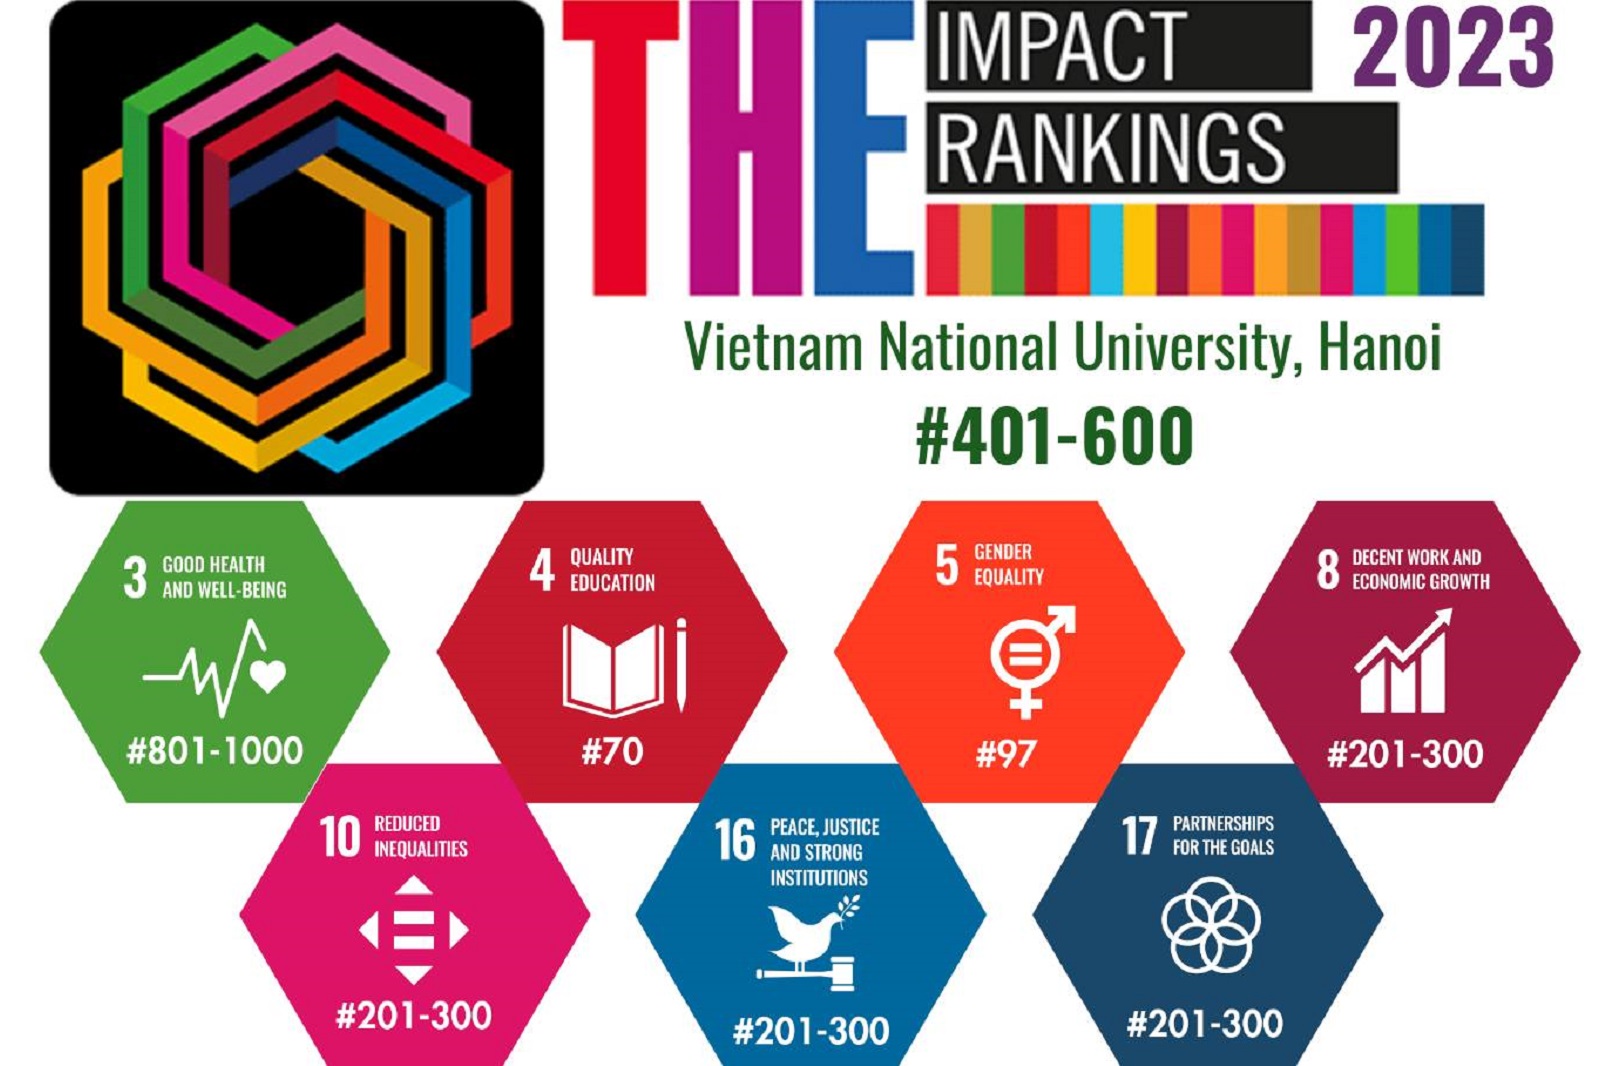 VNU has risen in the Times Higher Education Impact Rankings in 2023